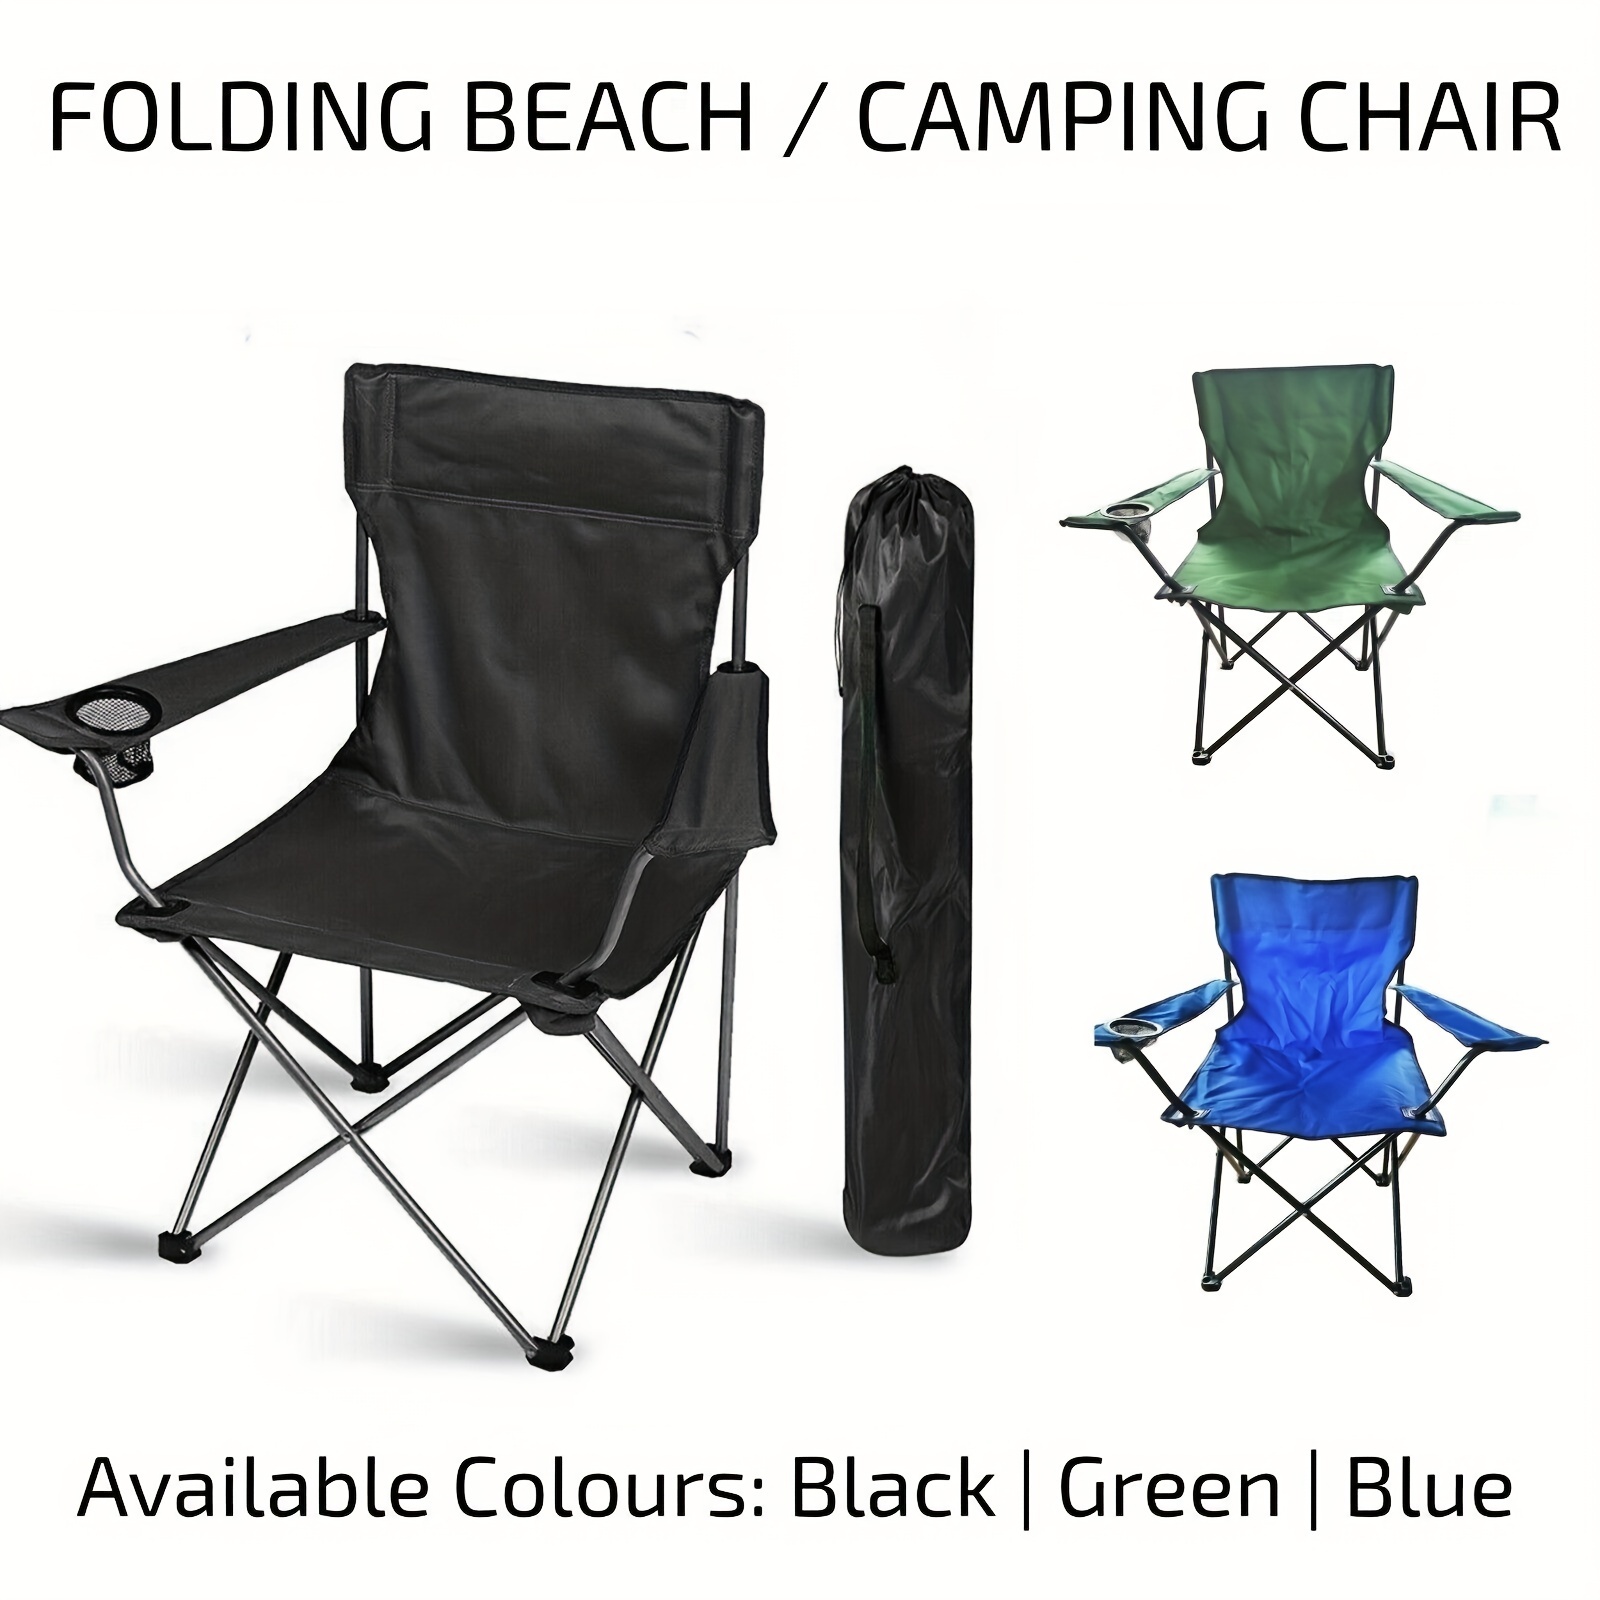 Folding chair stool outdoor portable fishing chair Kuwait